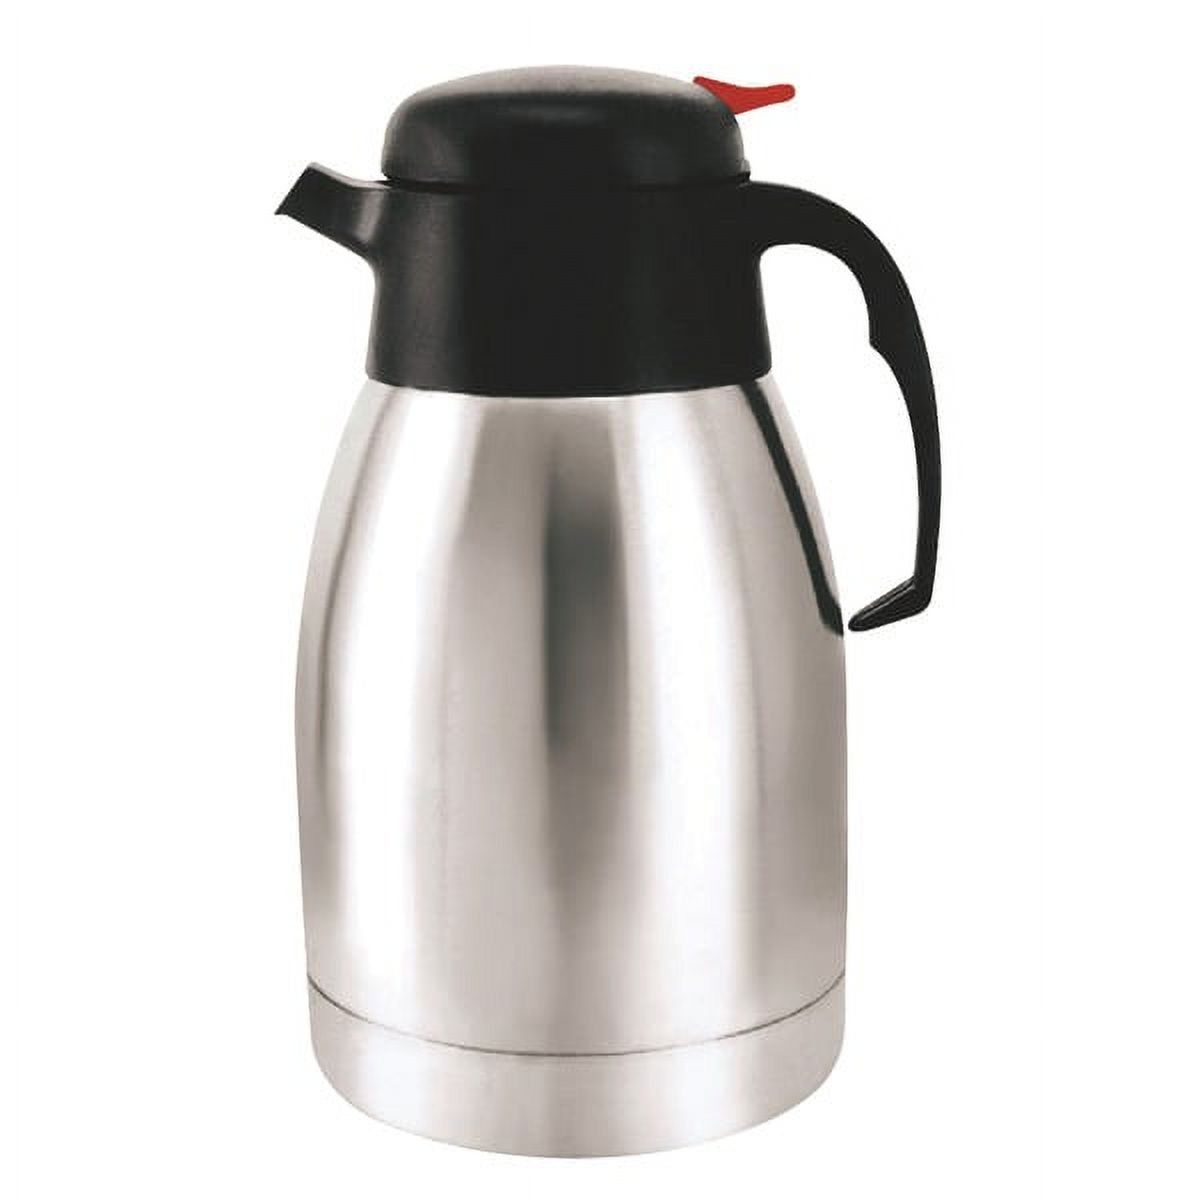 Brentwood Appliances Brentwood Appliances Cts-2000 Vacuum-Insulated Stainless Steel Coffee Carafe (68 Ounces) - image 1 of 1